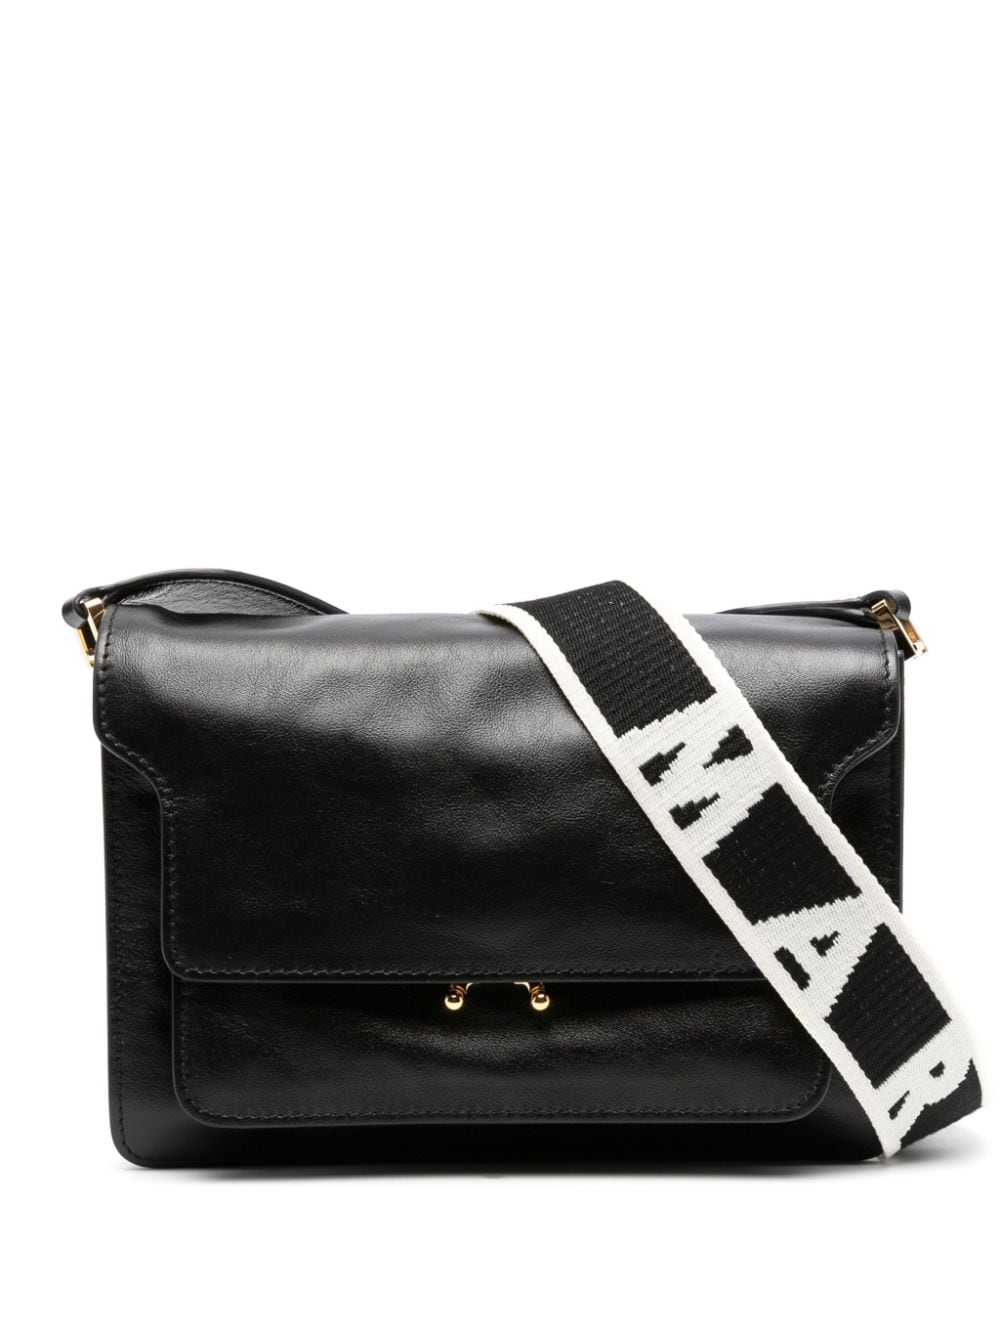 Marni Trunk Small Leather Shoulder Leather Bag